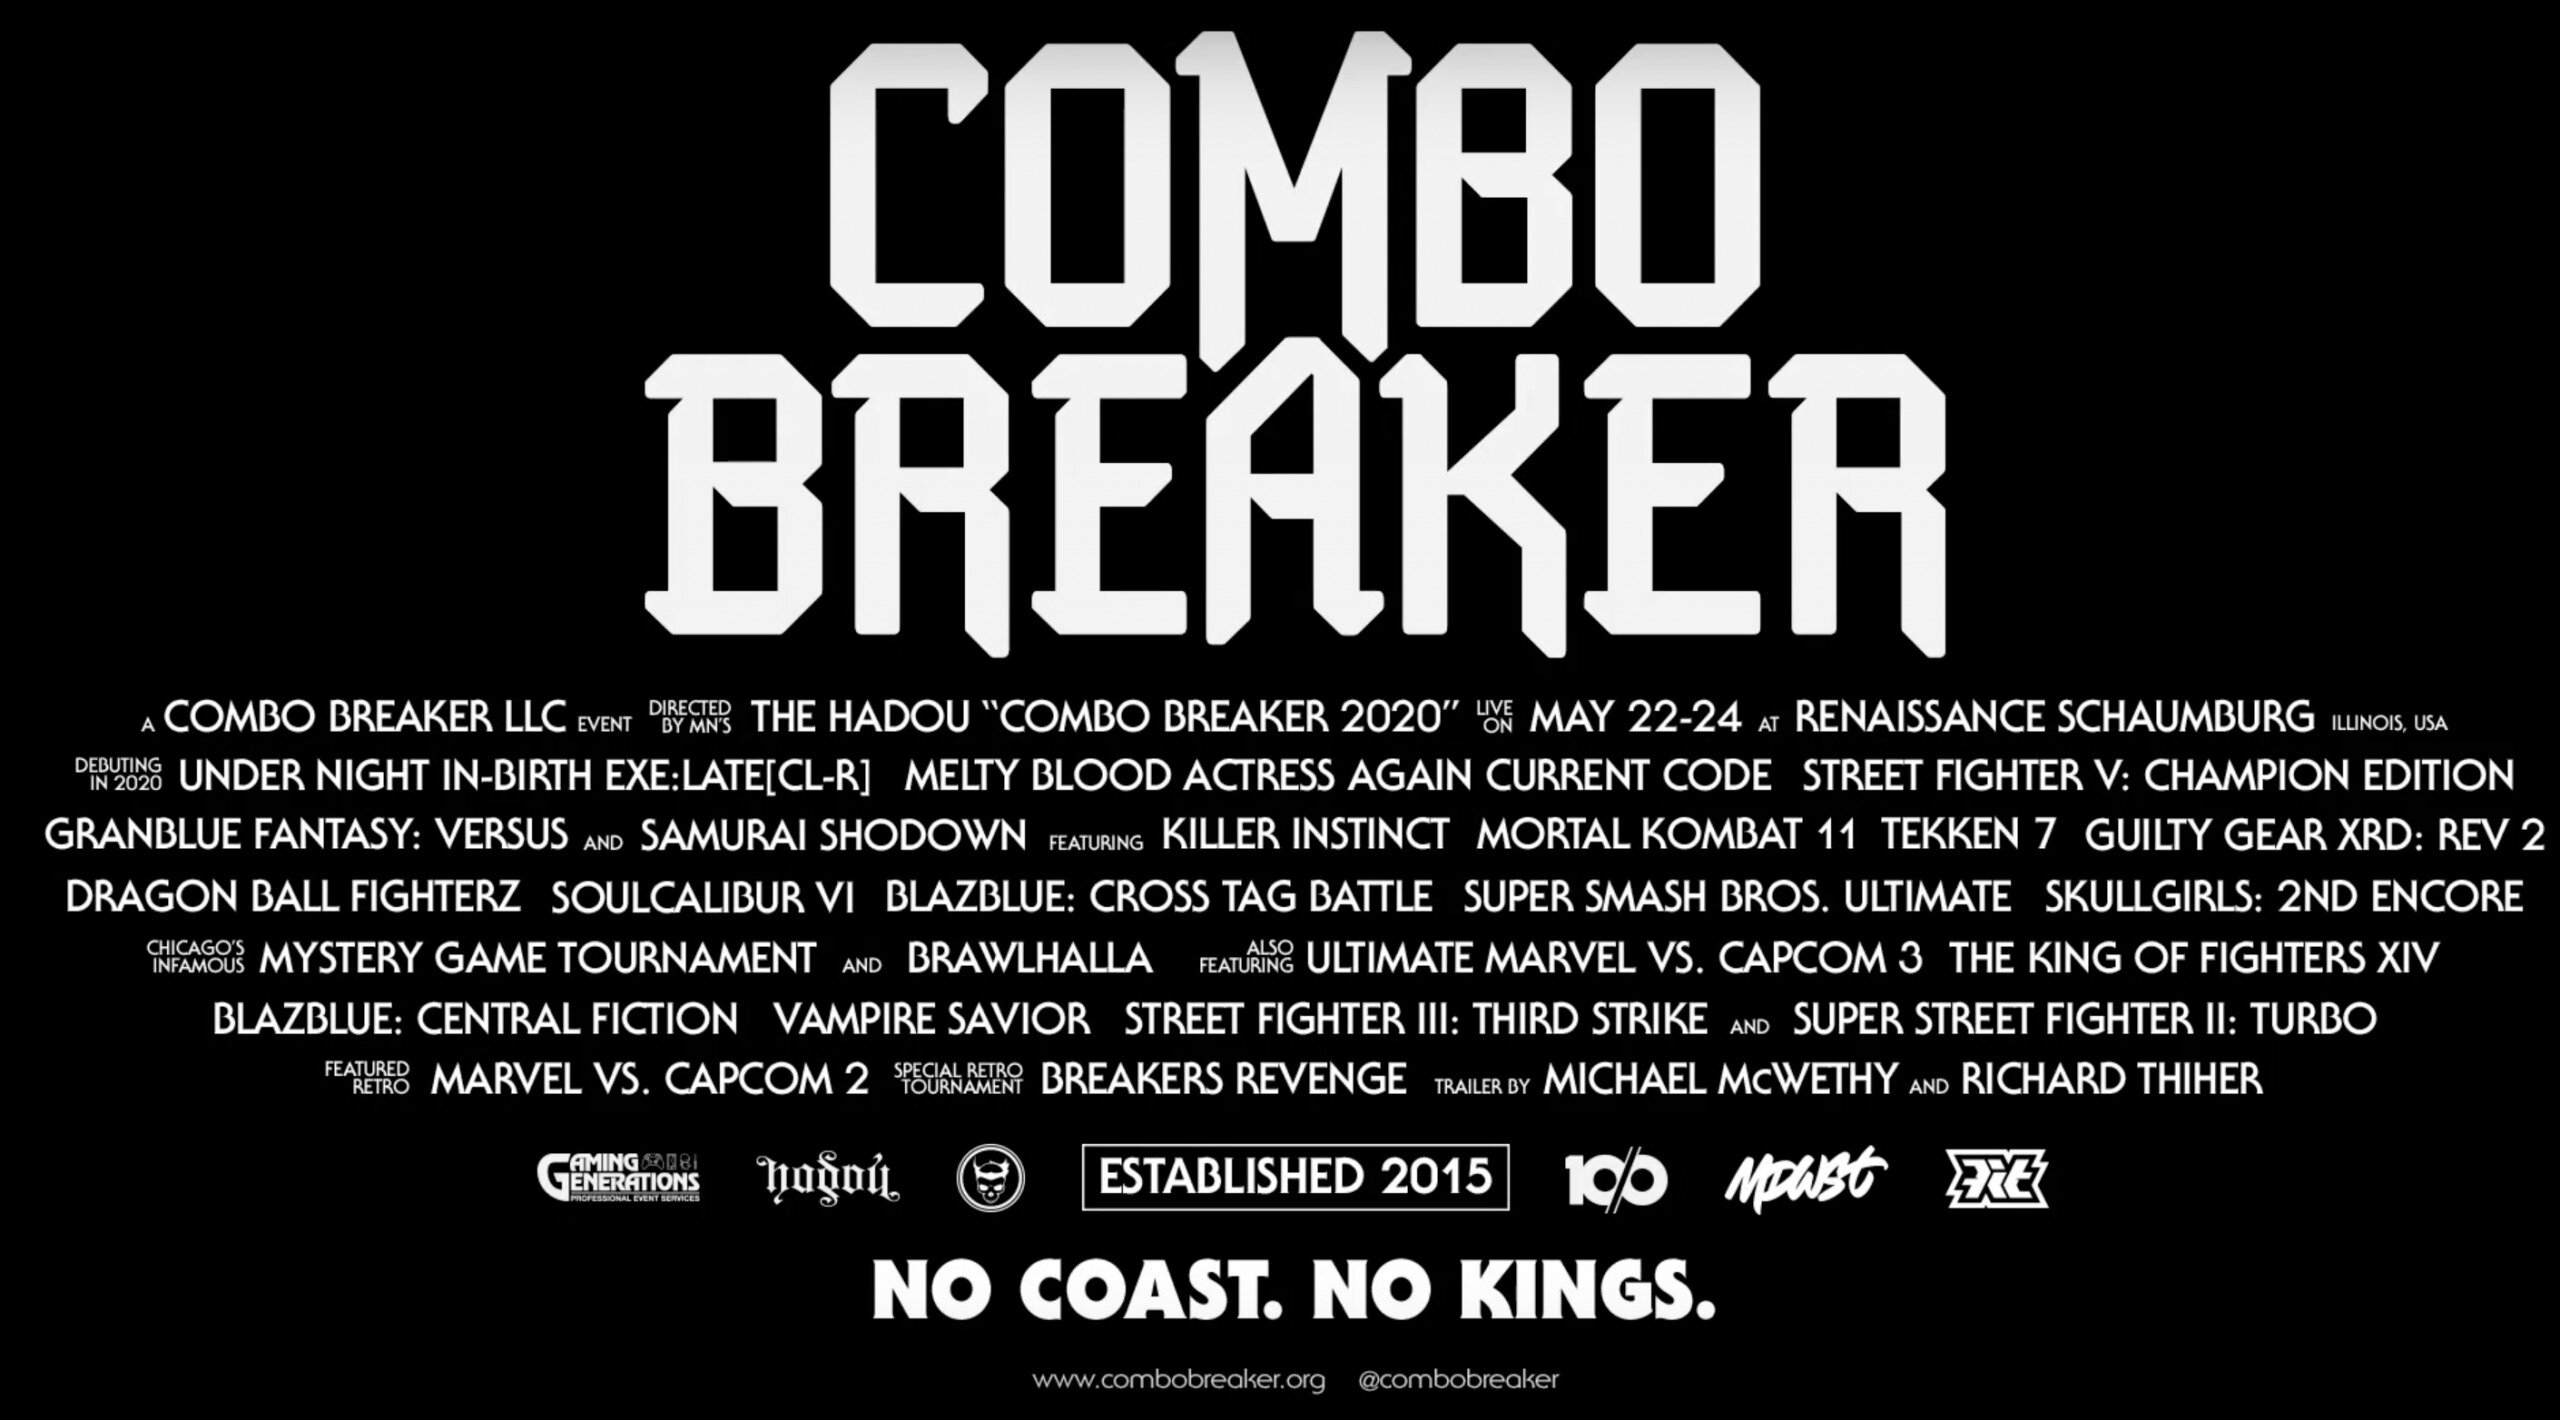 Combo Breaker will be moving from St. Charles to Schaumburg, Illinois for the 2020 event (Image via Combo Breaker/YouTube)